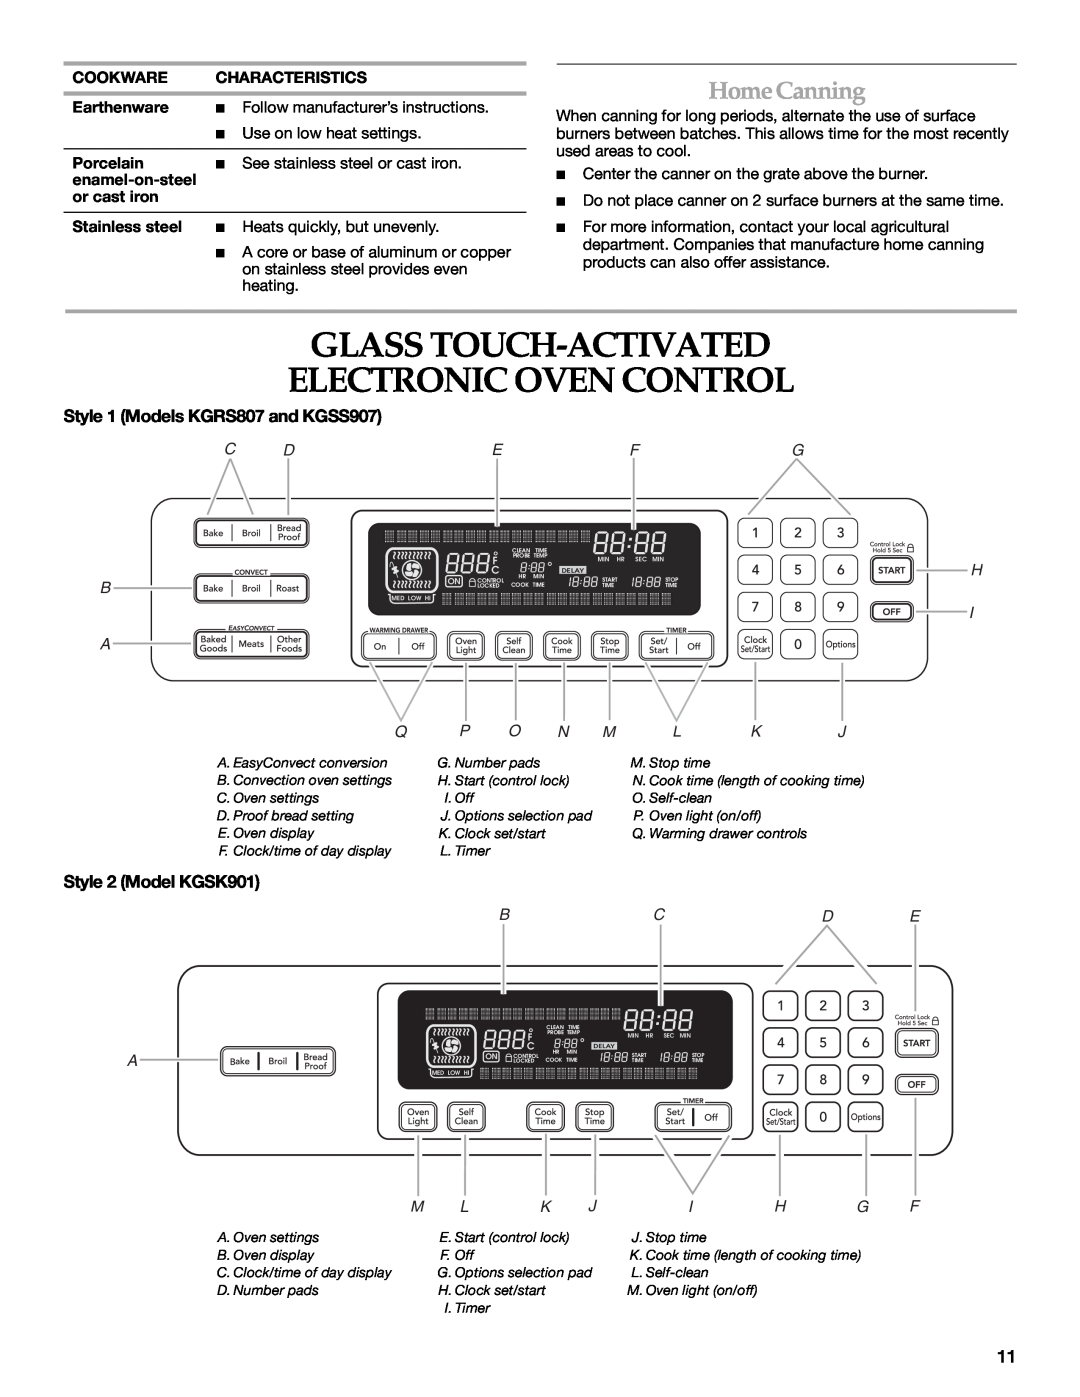 KitchenAid manual Glass Touch-Activated Electronic Oven Control, HomeCanning, Style 1 Models KGRS807 and KGSS907, Bcd E 